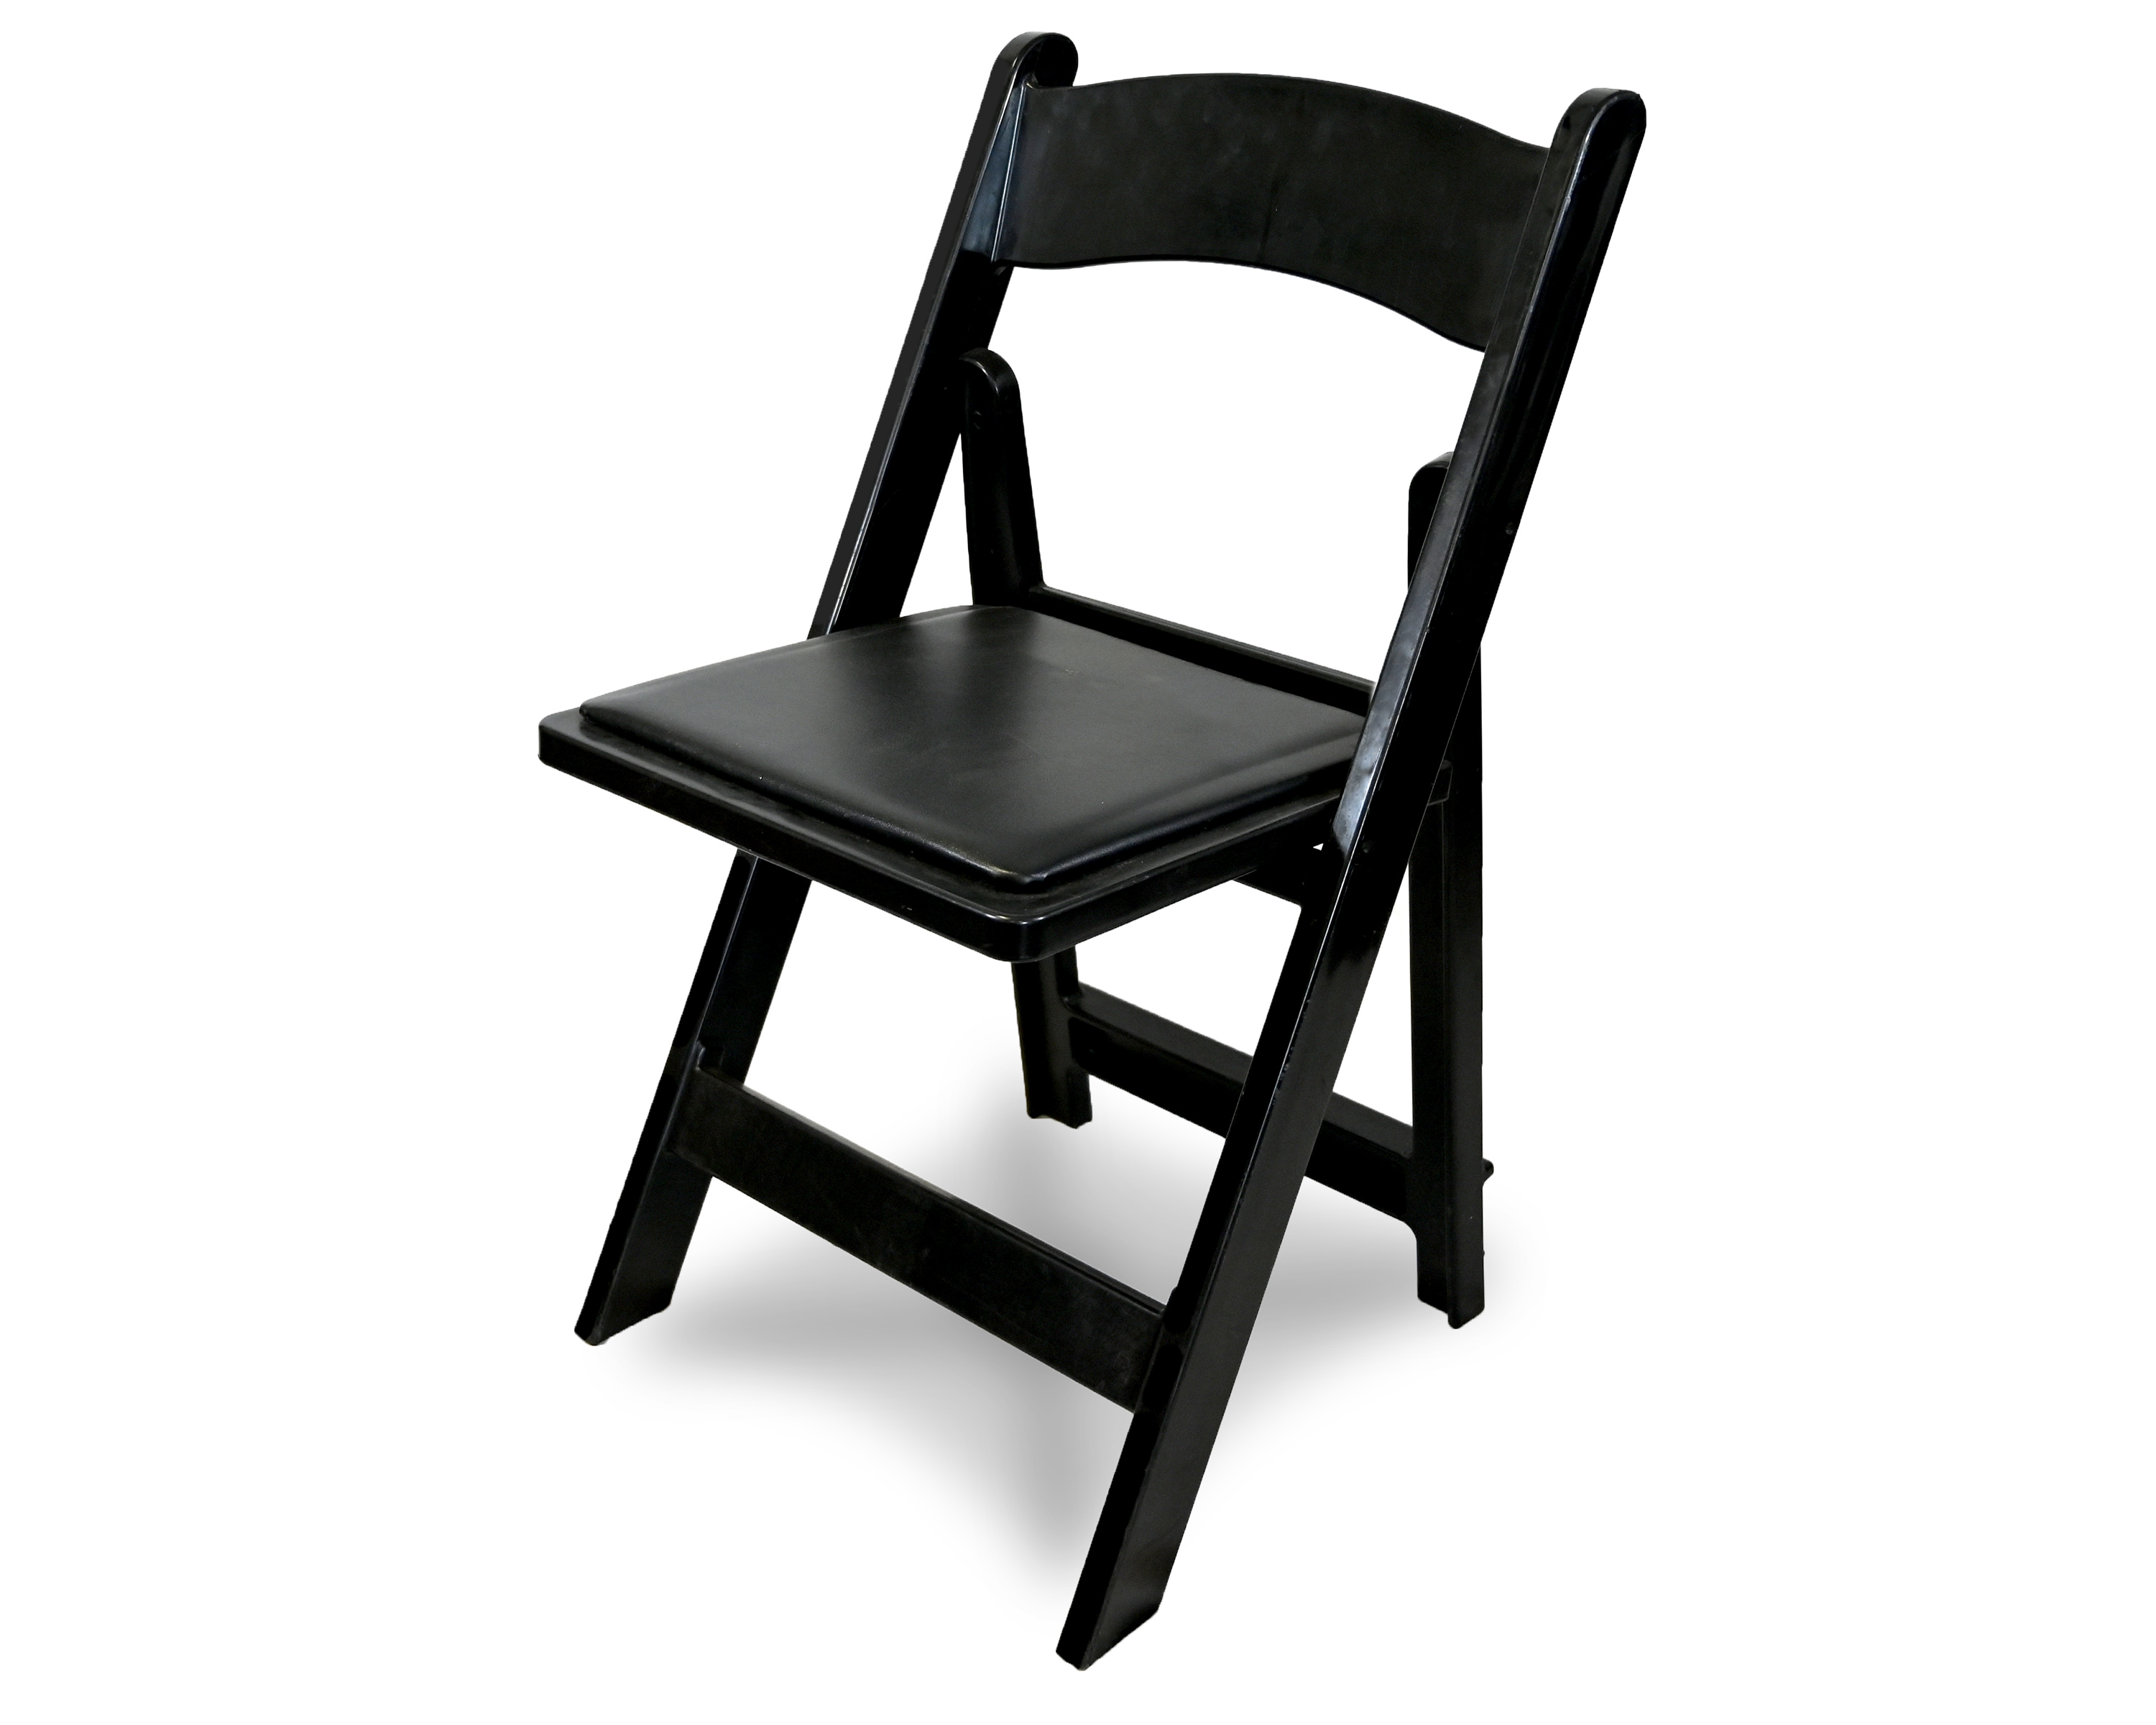 Affordable and Durable Resin Folding Chairs for Outdoor Events